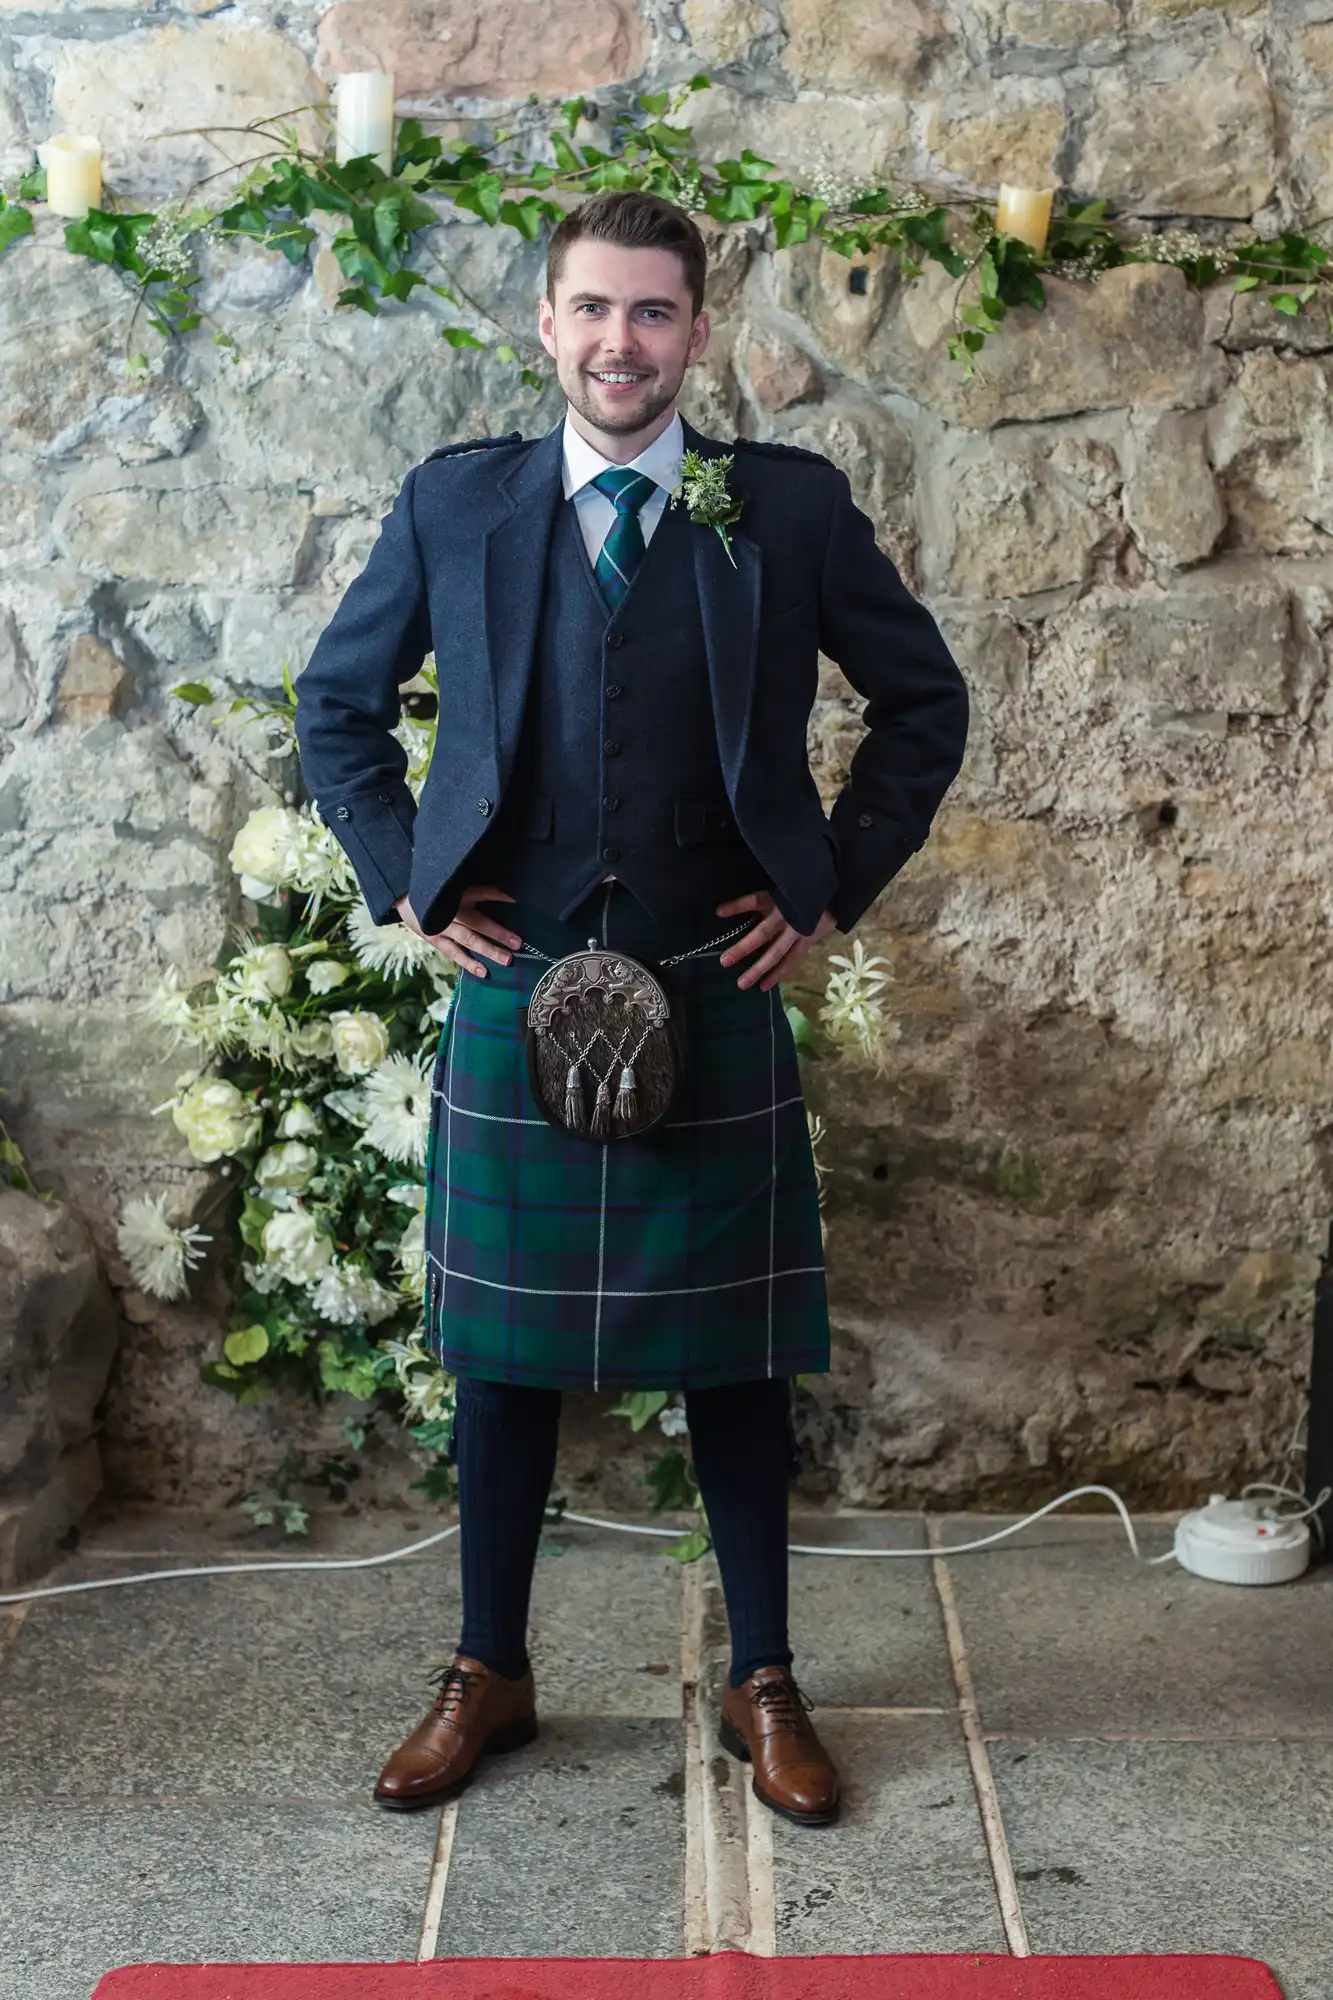 A man in a traditional scottish kilt and jacket standing with a smile in a rustic stone-walled room decorated with candles and flowers.